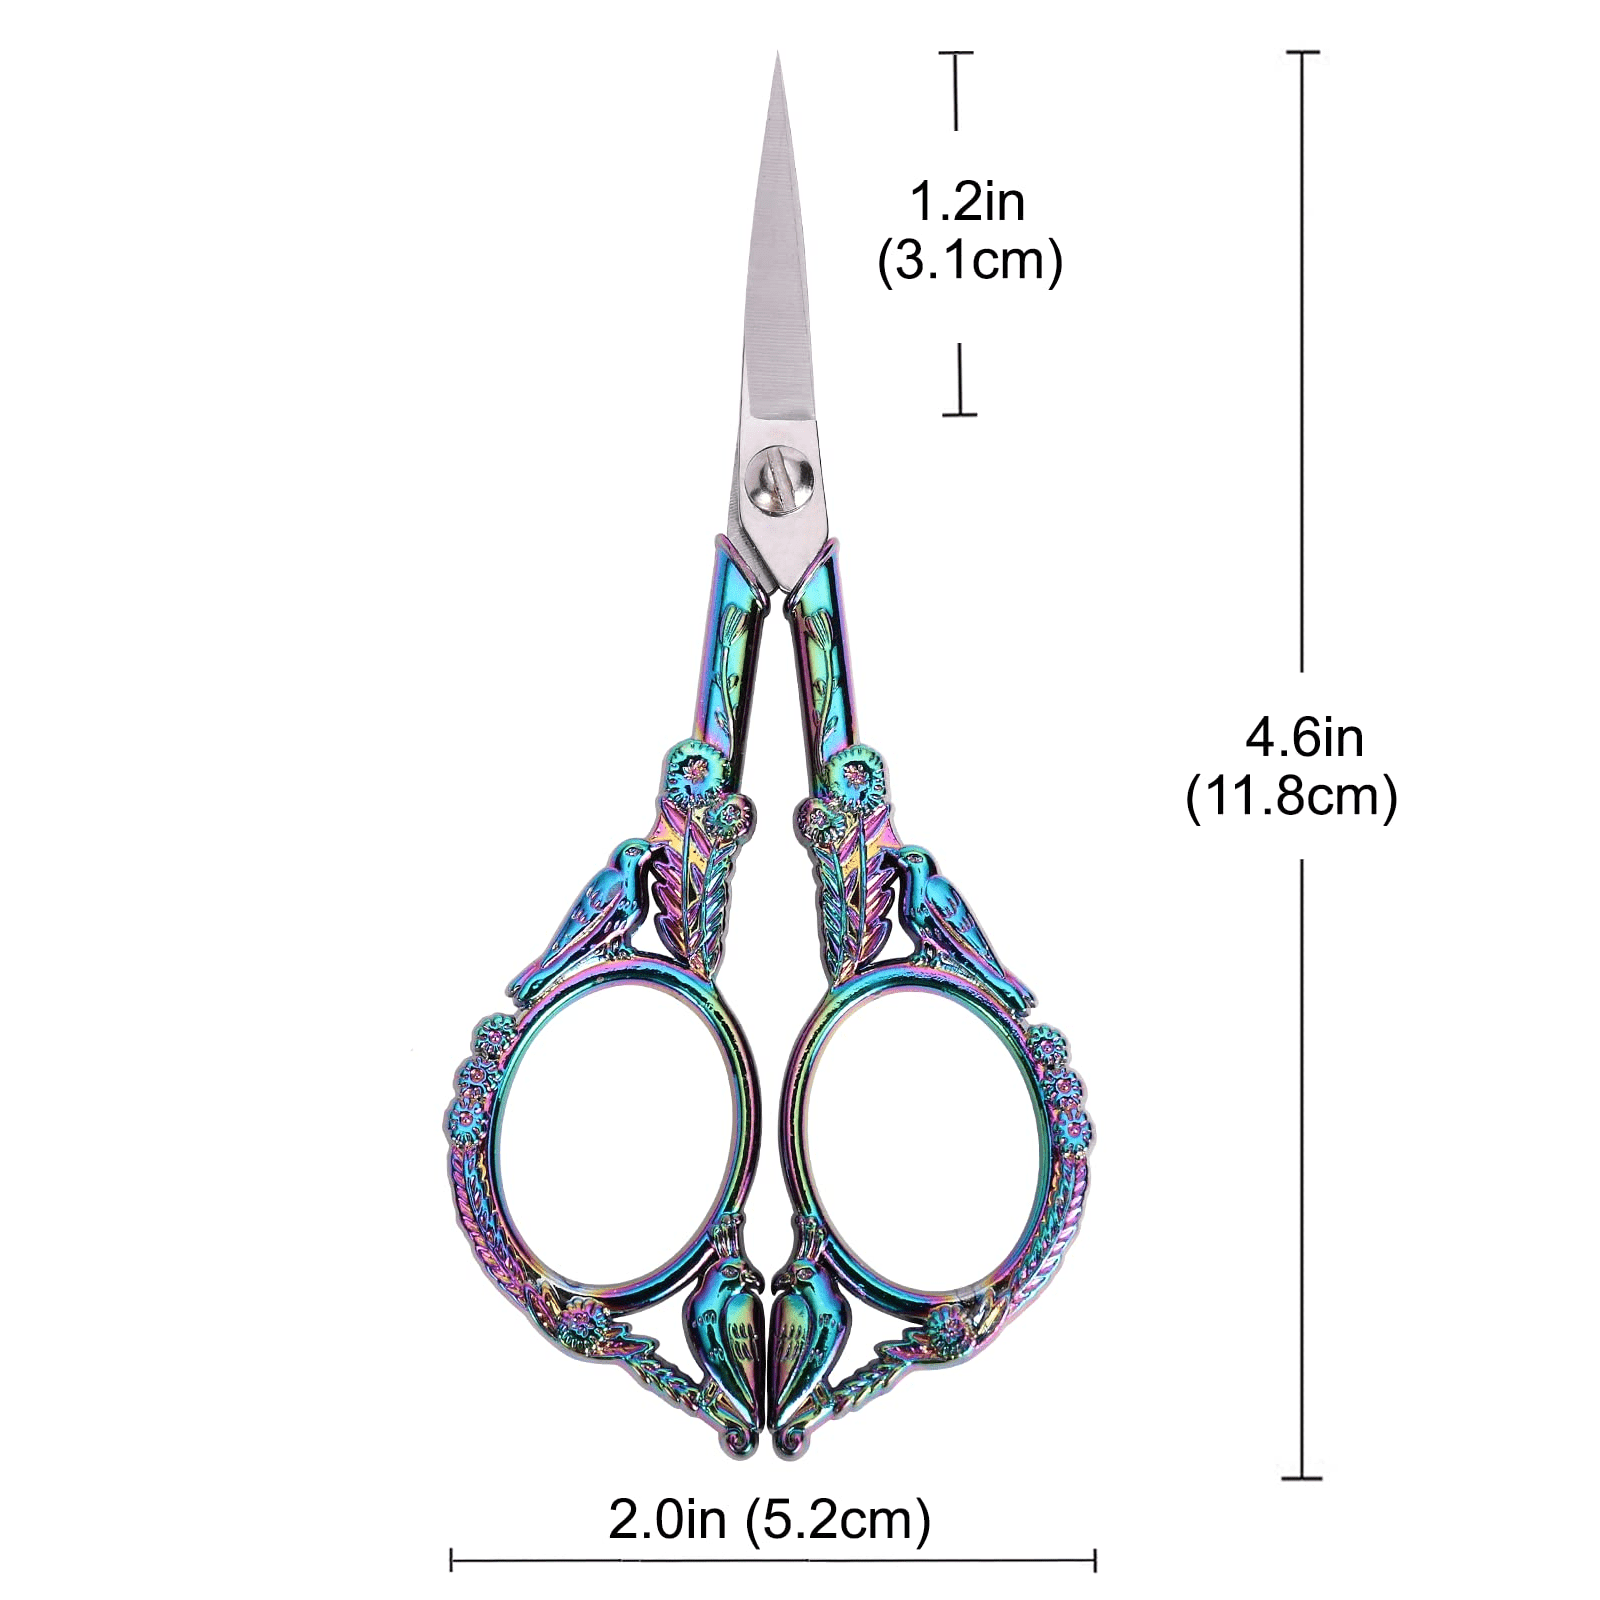 mnjin embroidery scissors sewing embroidery scissors small vintage sharp  detail shears for craft artwork needlework yarn handicraft diy tool thread  snips fb 